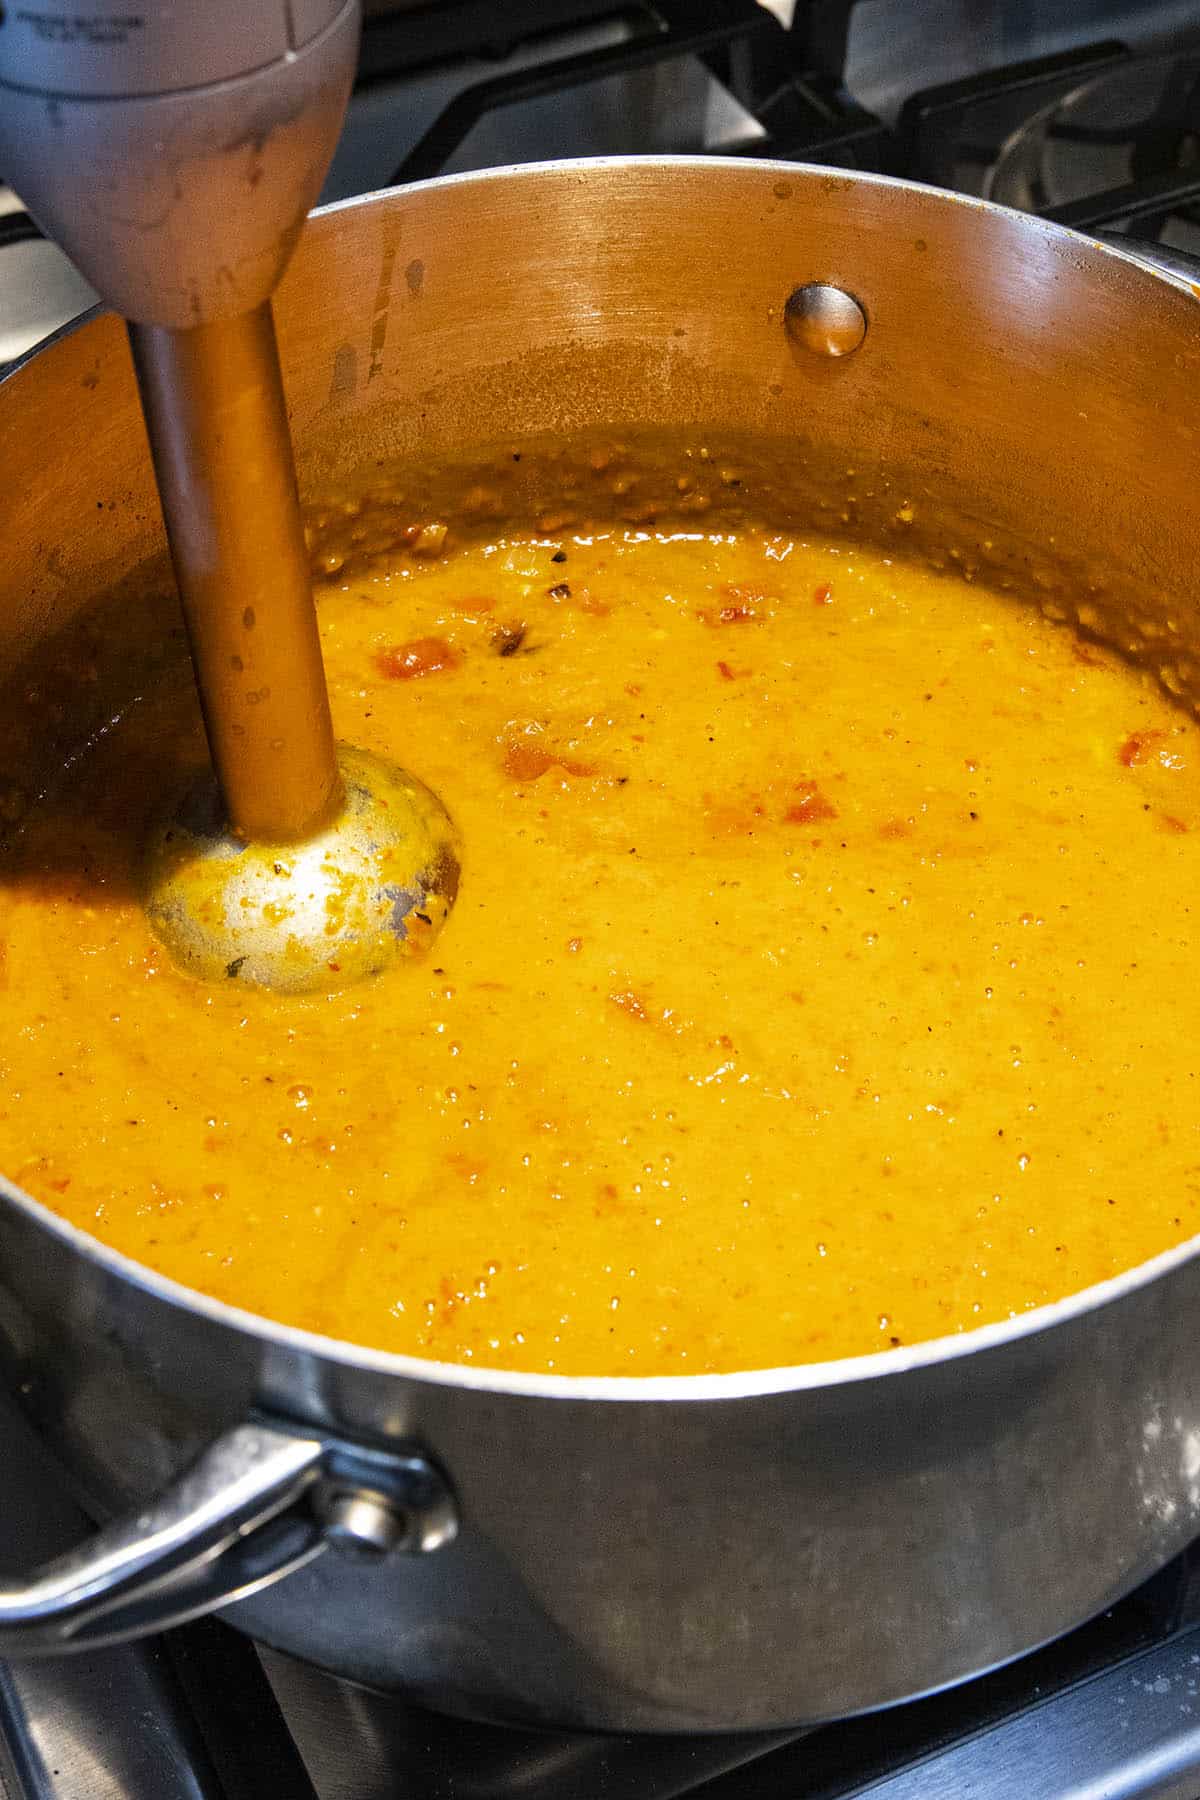 Blending the Roasted Red Pepper Soup in the pot